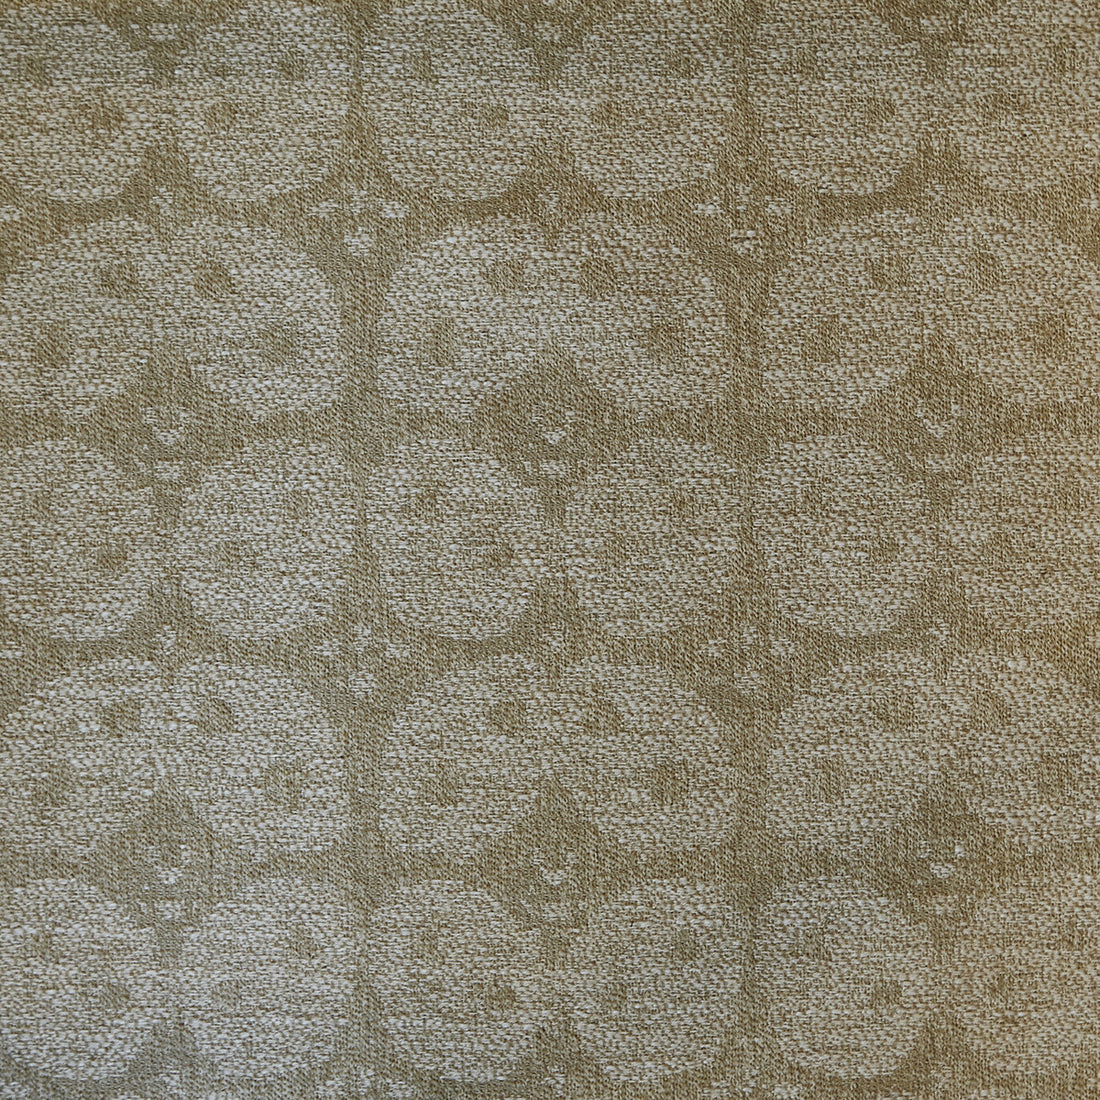 Panarea fabric in natural color - pattern GWF-3201.16.0 - by Lee Jofa Modern in the Allegra Hicks Islands collection